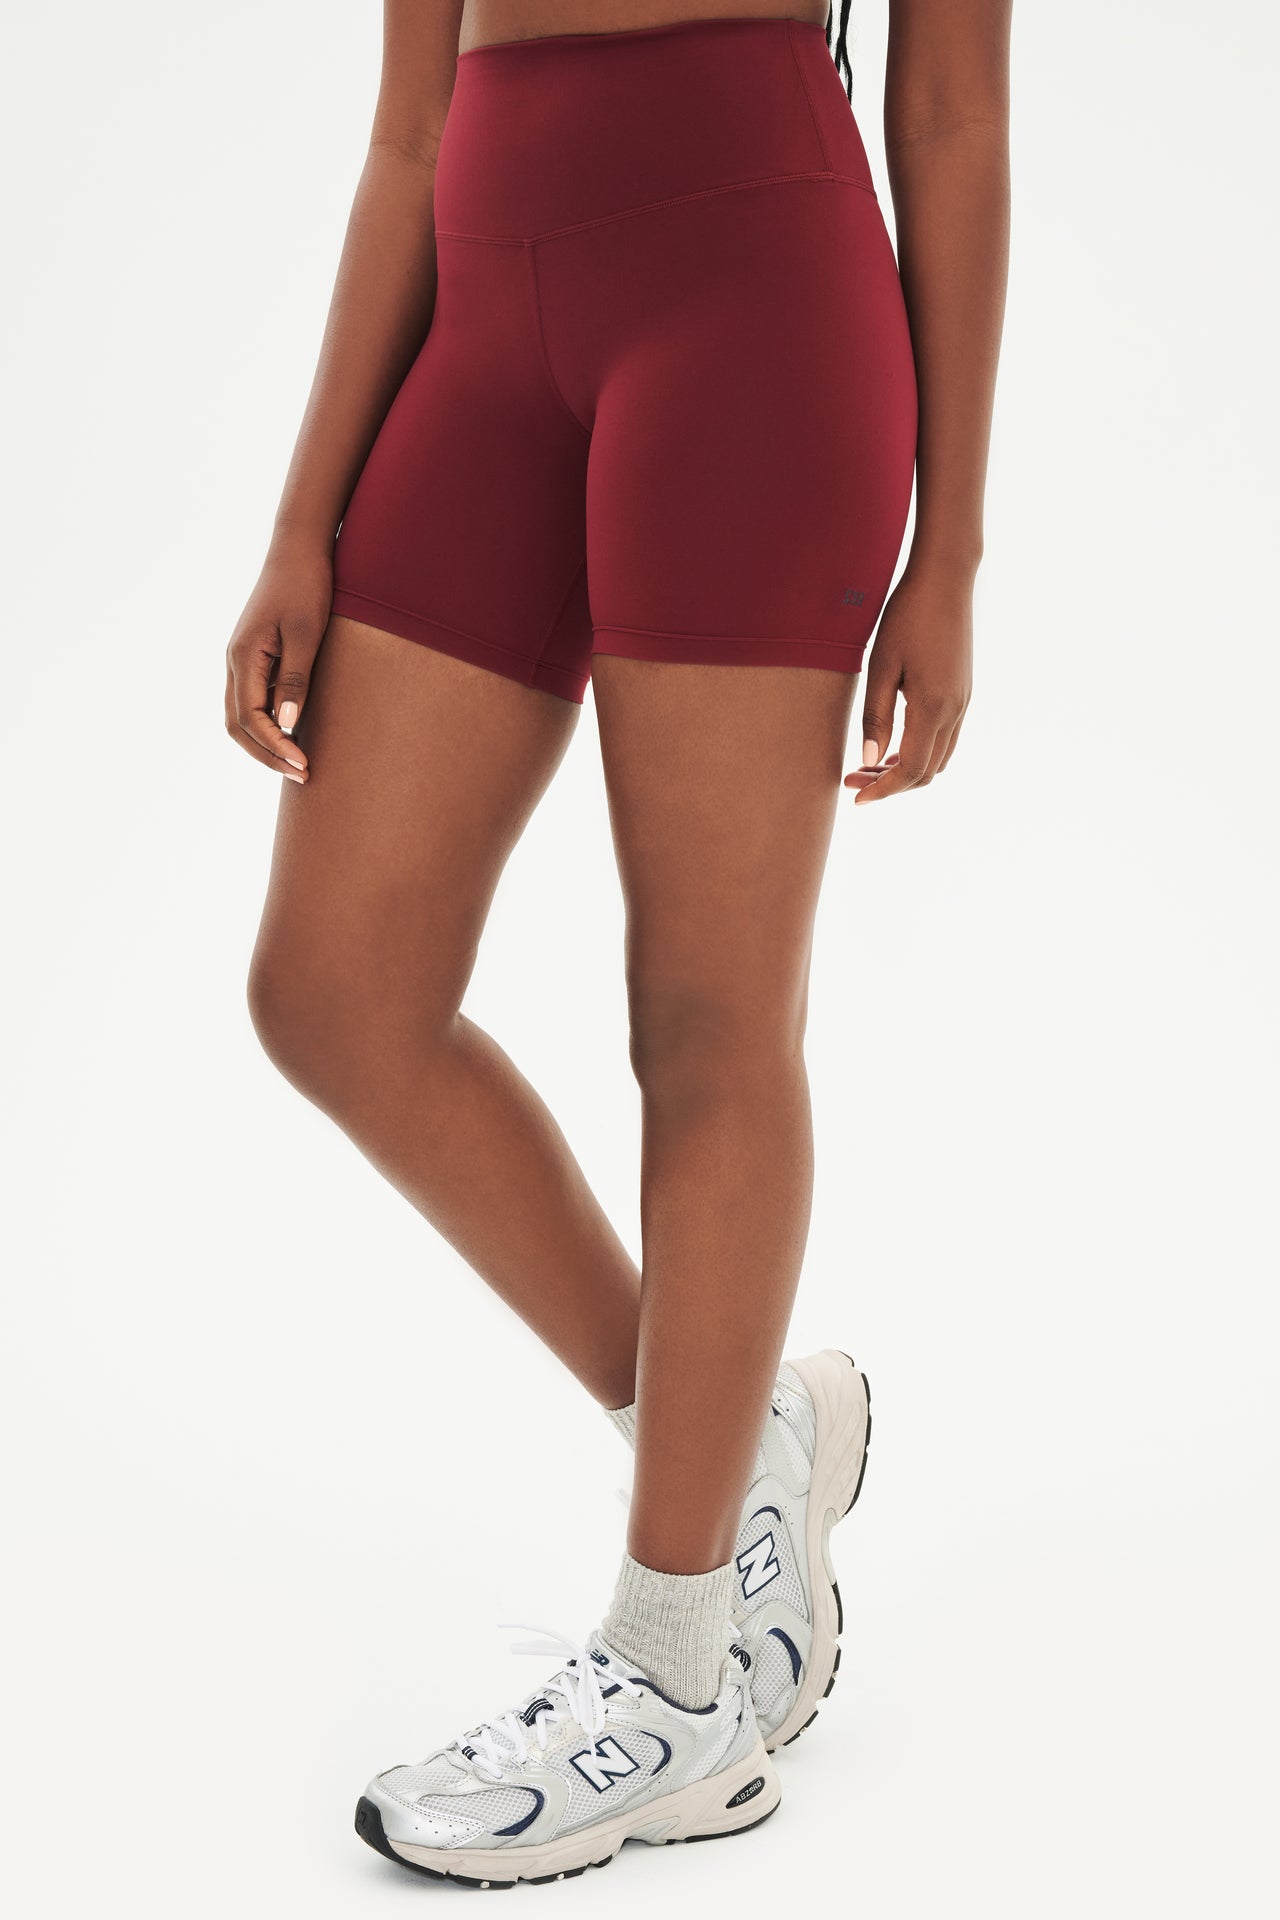 Side view of girl wearing highwaisted mid thigh deep red bike shorts with white shoes